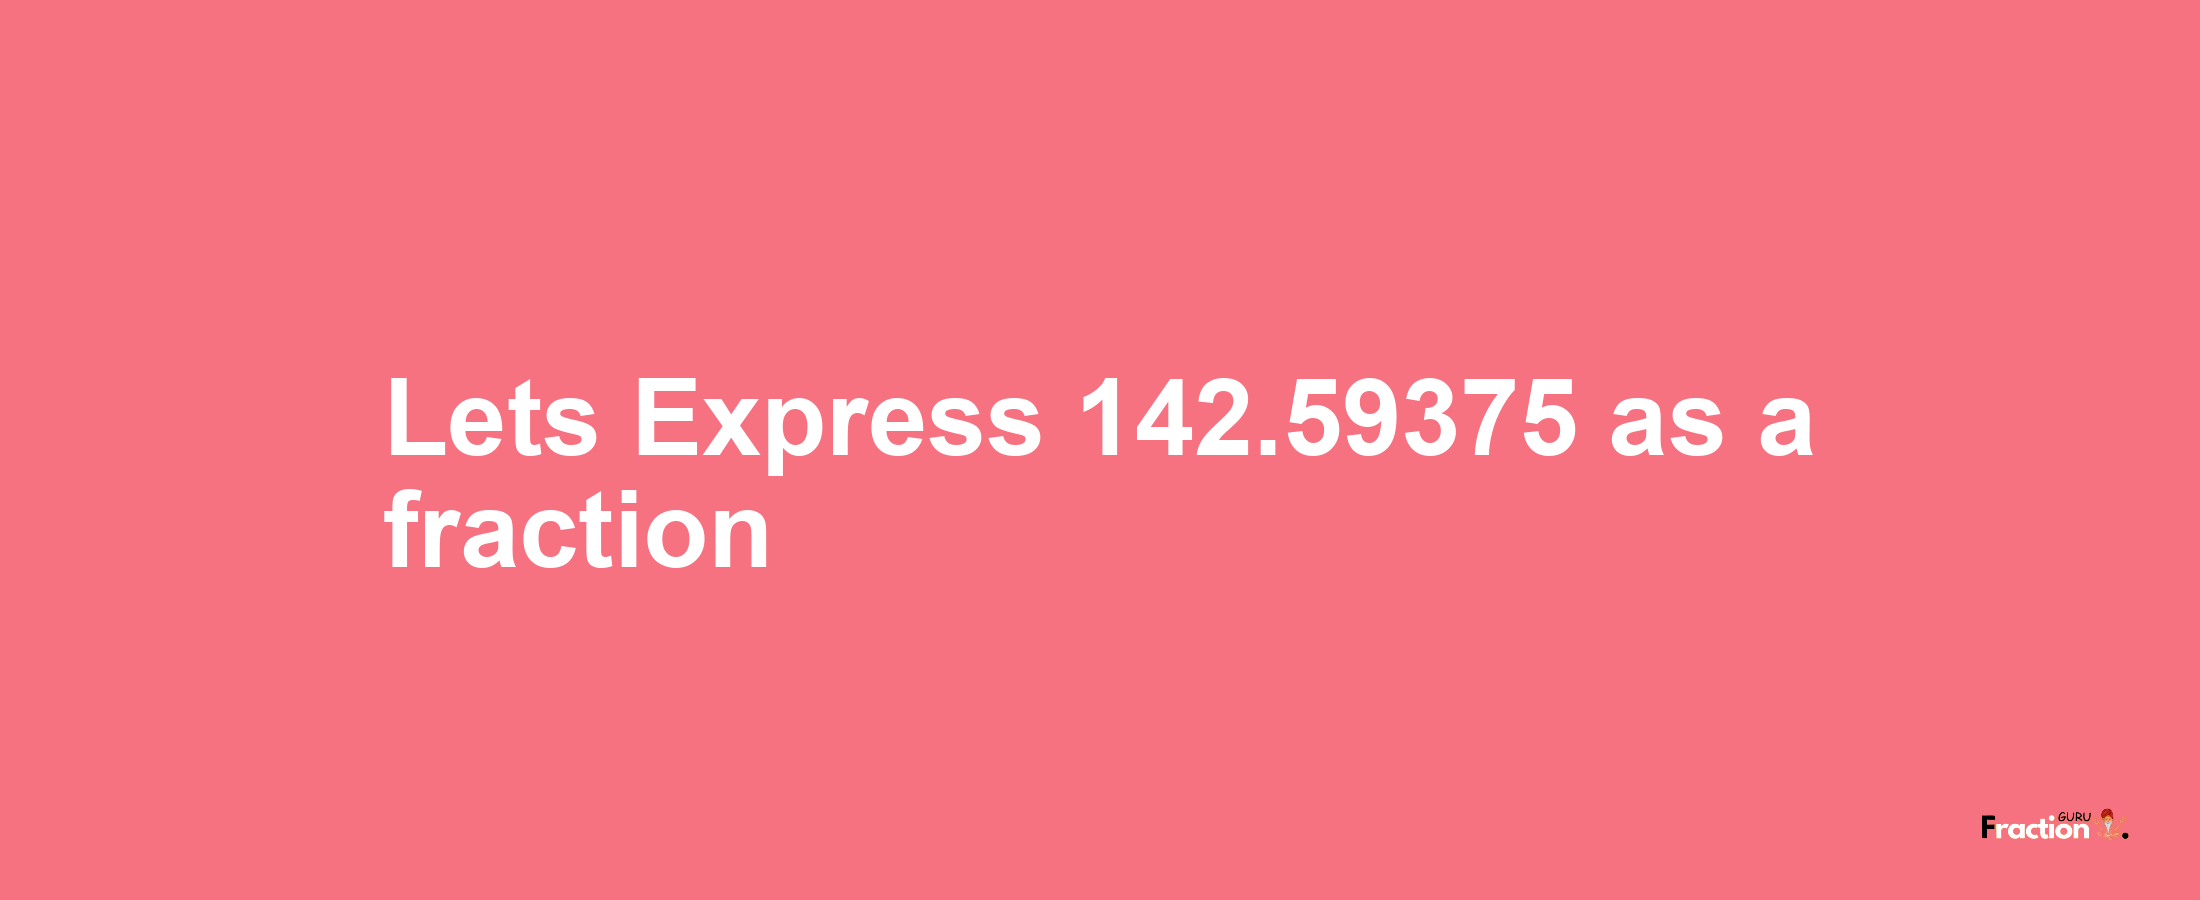 Lets Express 142.59375 as afraction